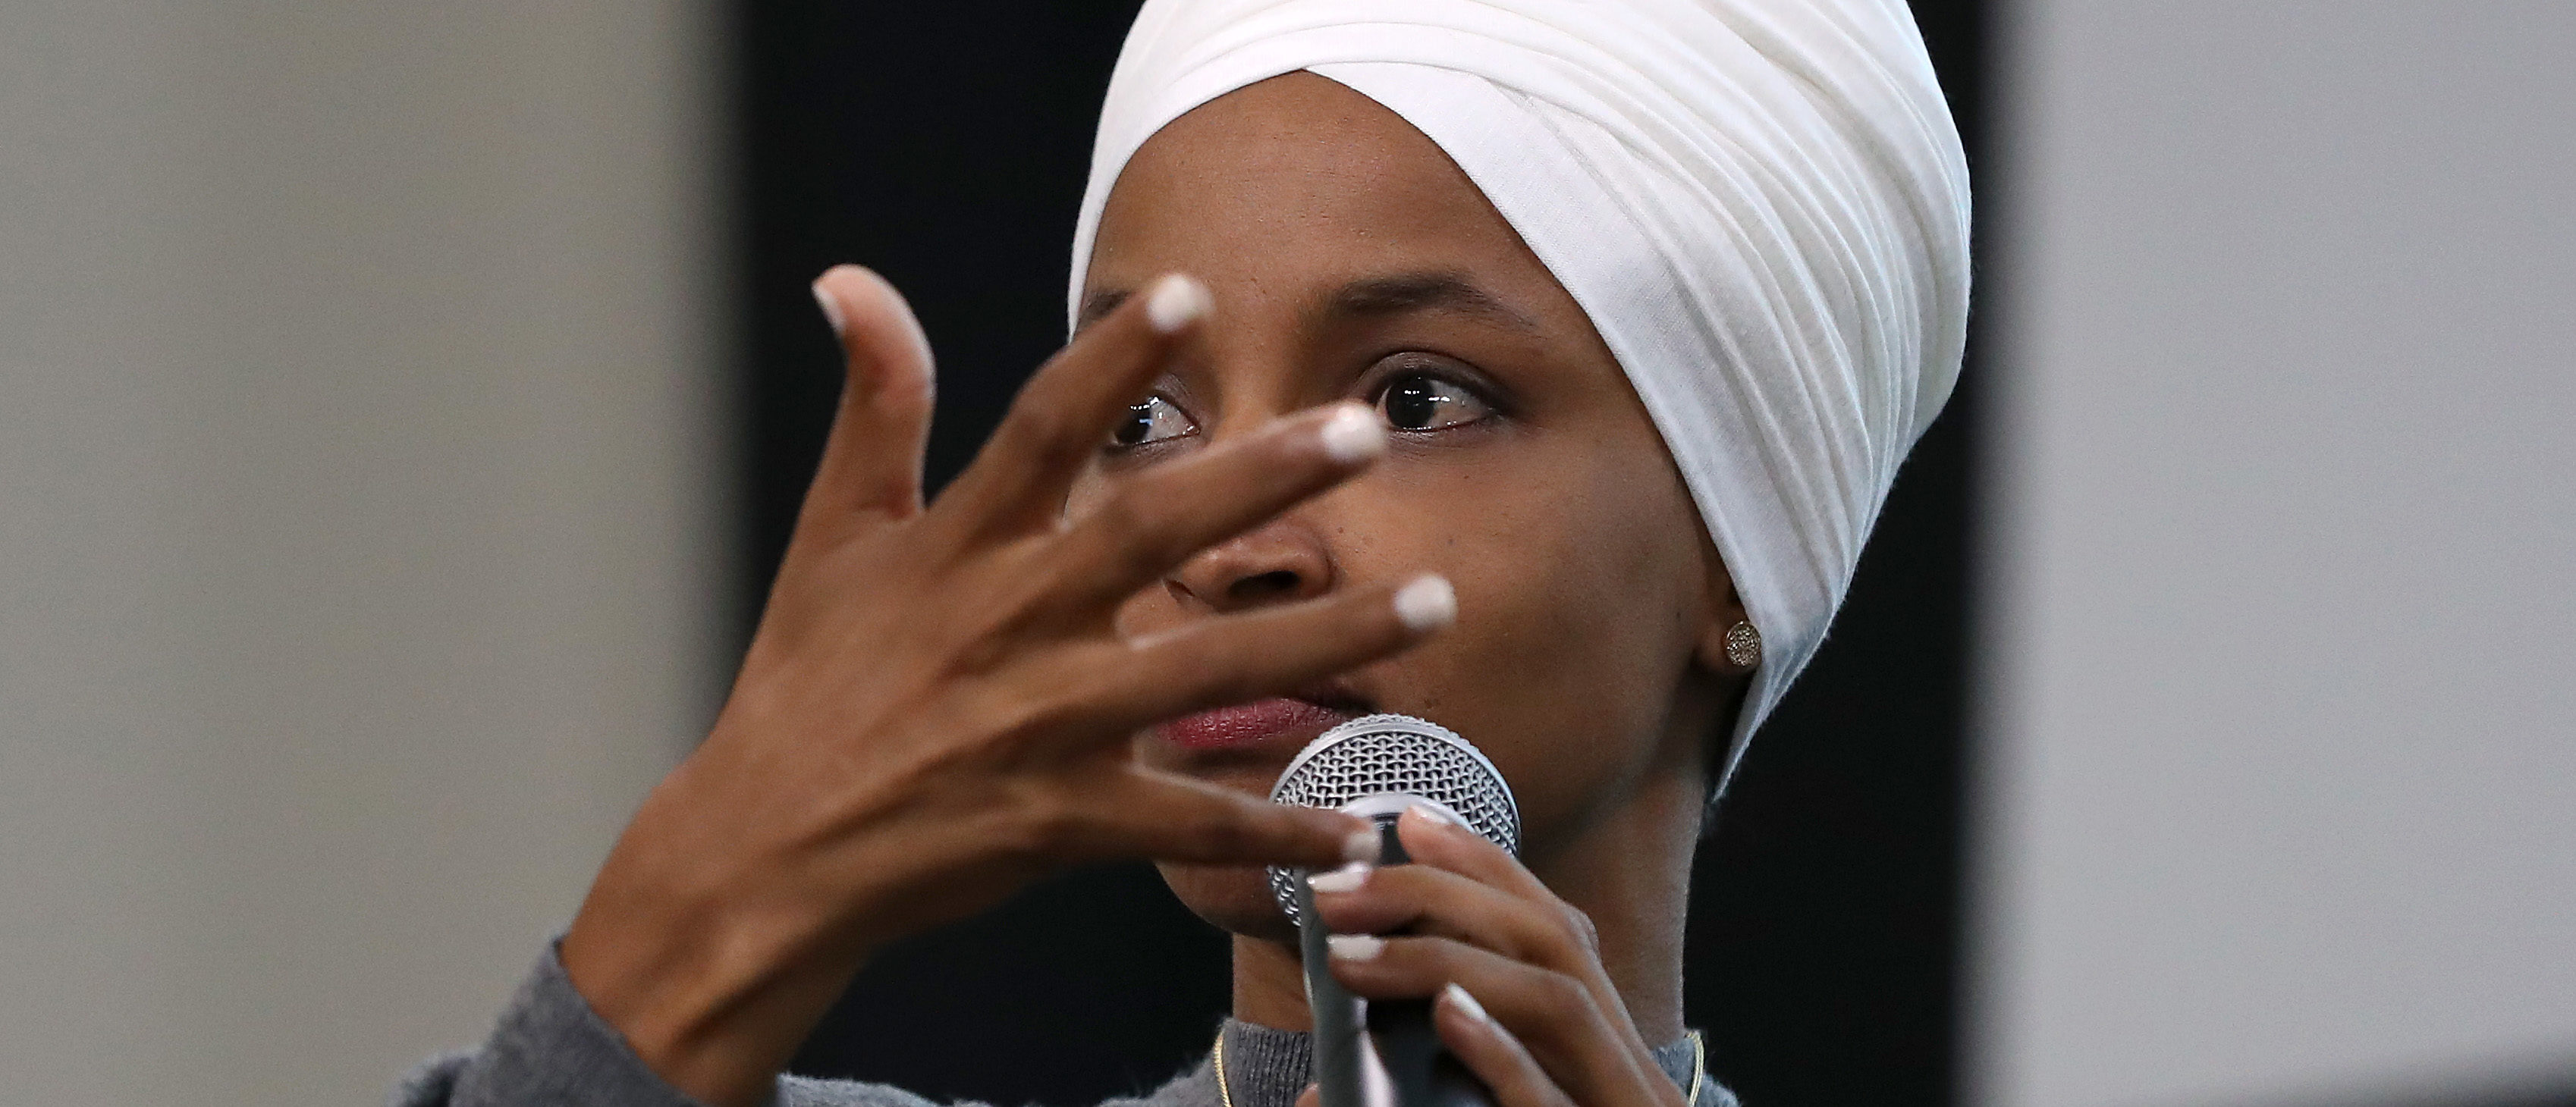 WASHINGTON, DC - JULY 23: Rep. Ilhan Omar (D-MN) participates in a panel discussion during the Muslim Collective For Equitable Democracy Conference and Presidential Forum at the The National Housing Center July 23, 2019 in Washington, DC. As a member of a group of four freshman Democratic women of color, known informally as 'The Squad,' Omar has been targeted by President Donald Trump with controversial tweets during the last week. (Photo by Chip Somodevilla/Getty Images)